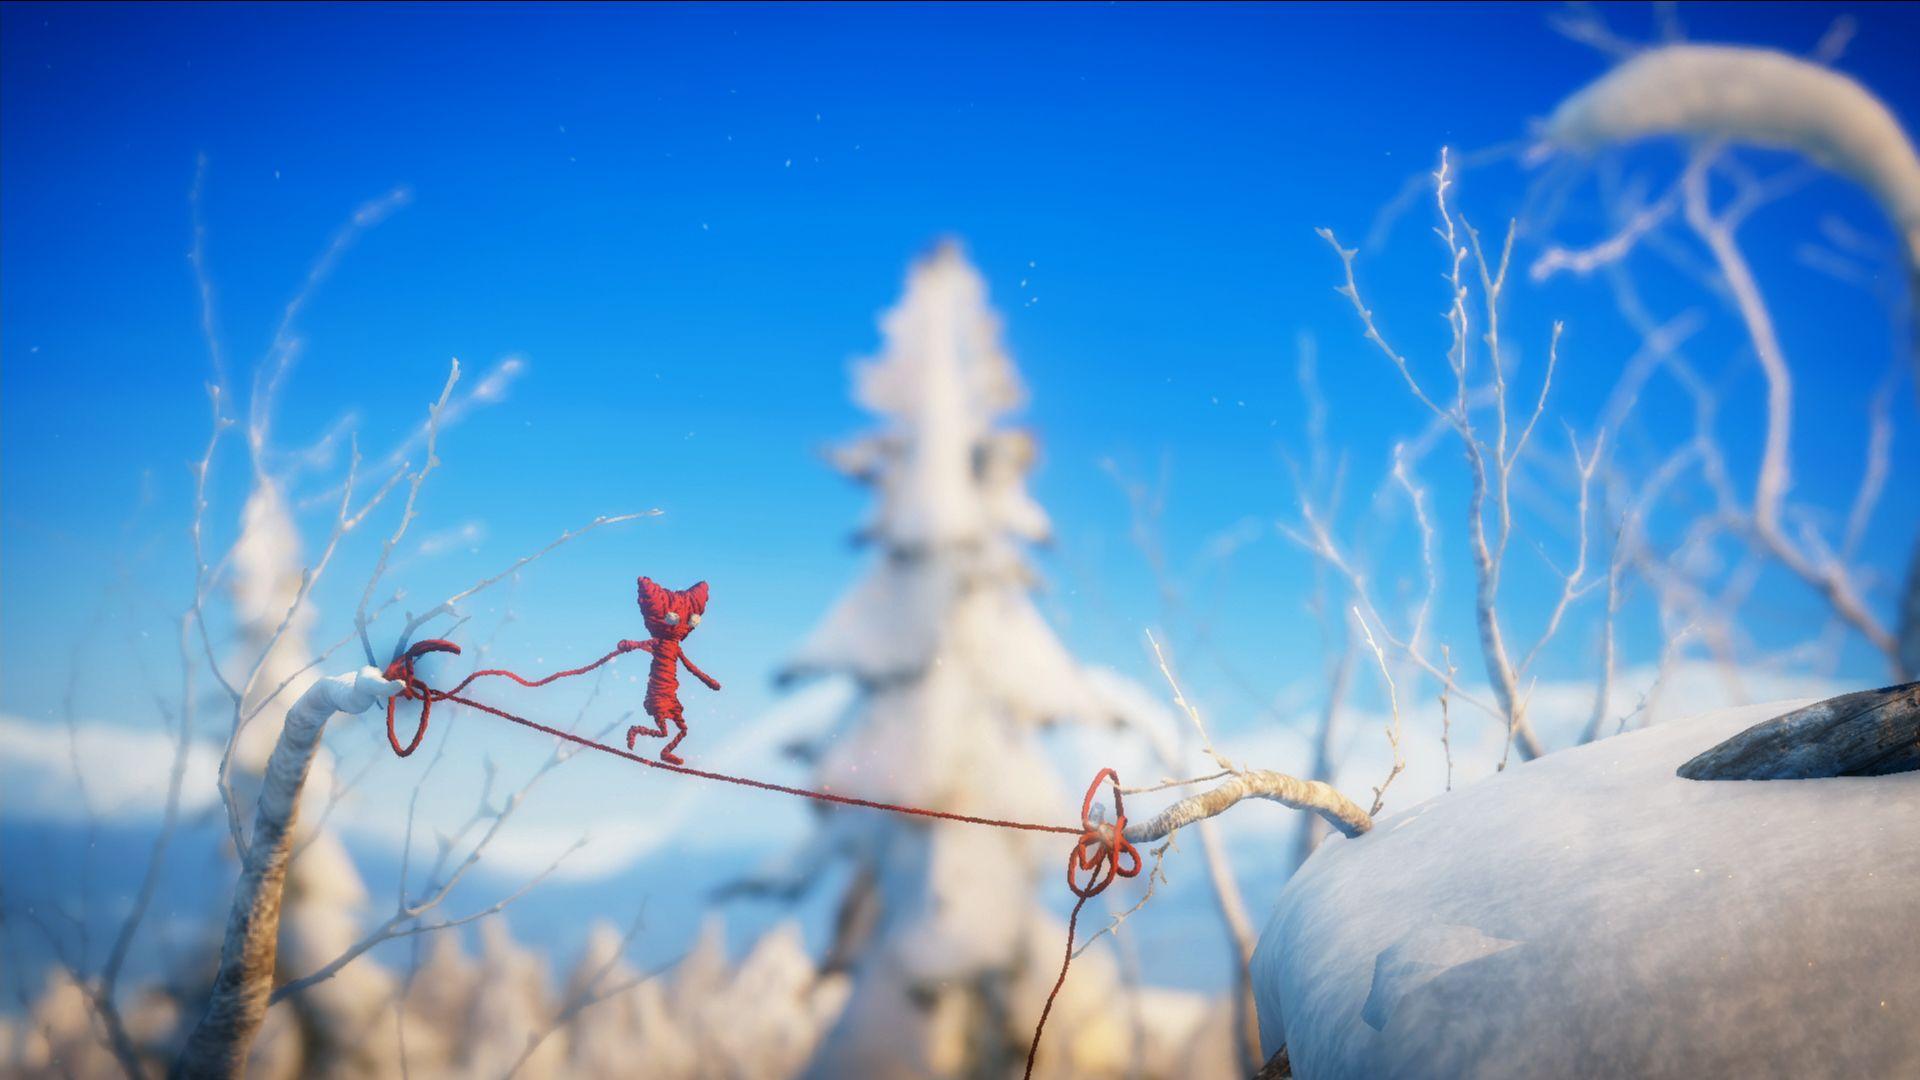 Unravel Arcade Game Wallpaper. Games. First video game